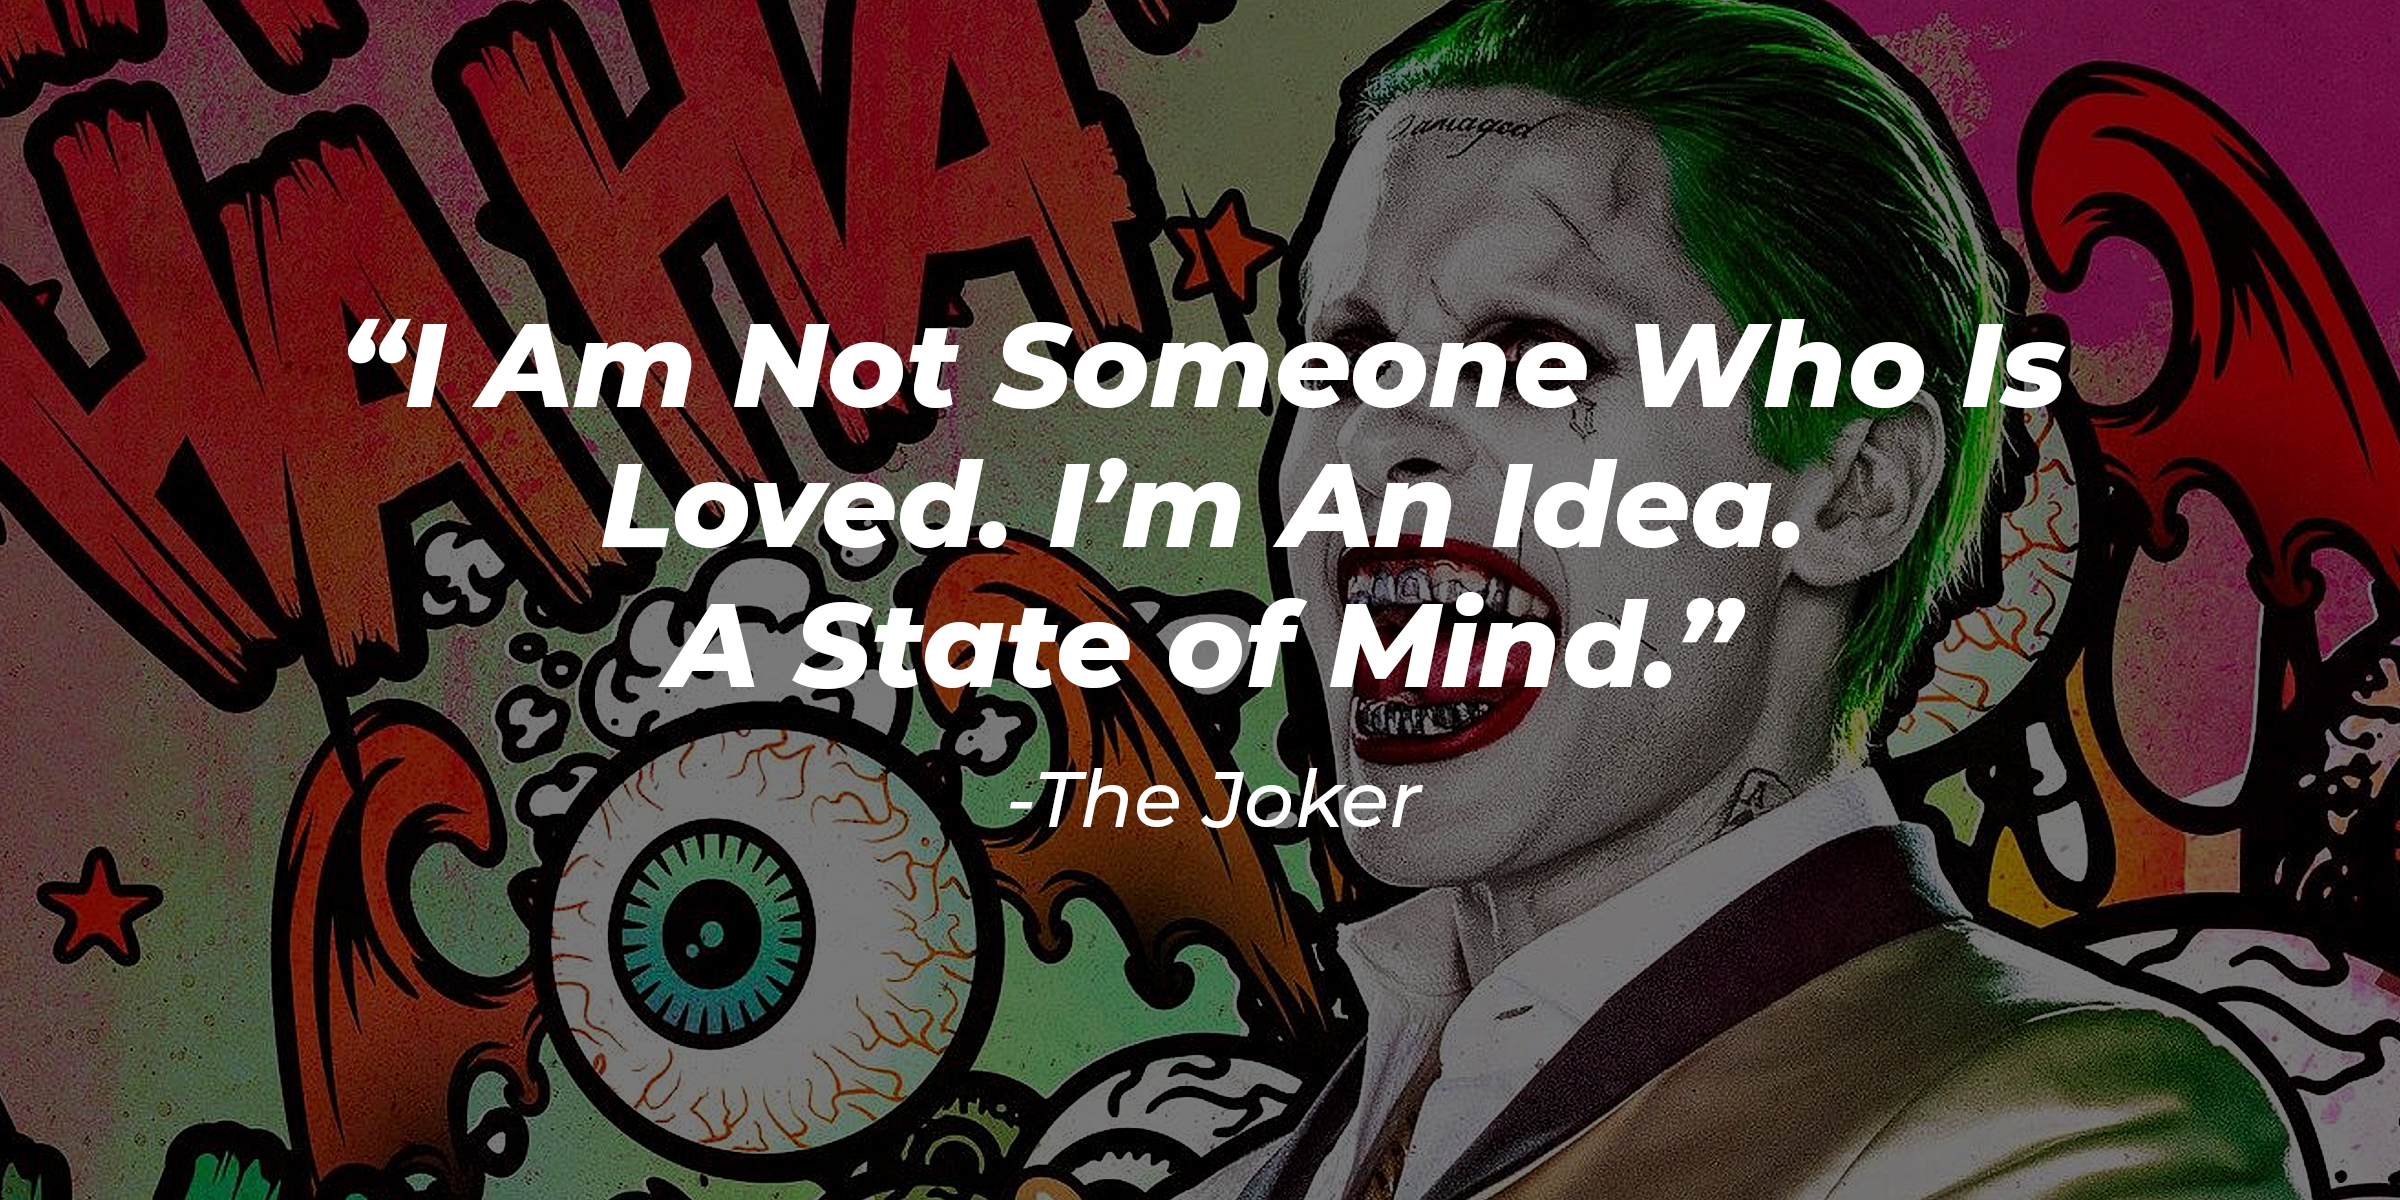 The Joker with his quote: "I Am Not Someone Who Is Loved. I'm An Idea. A State of Mind." | Source: facebook.com/thesuicidesquad